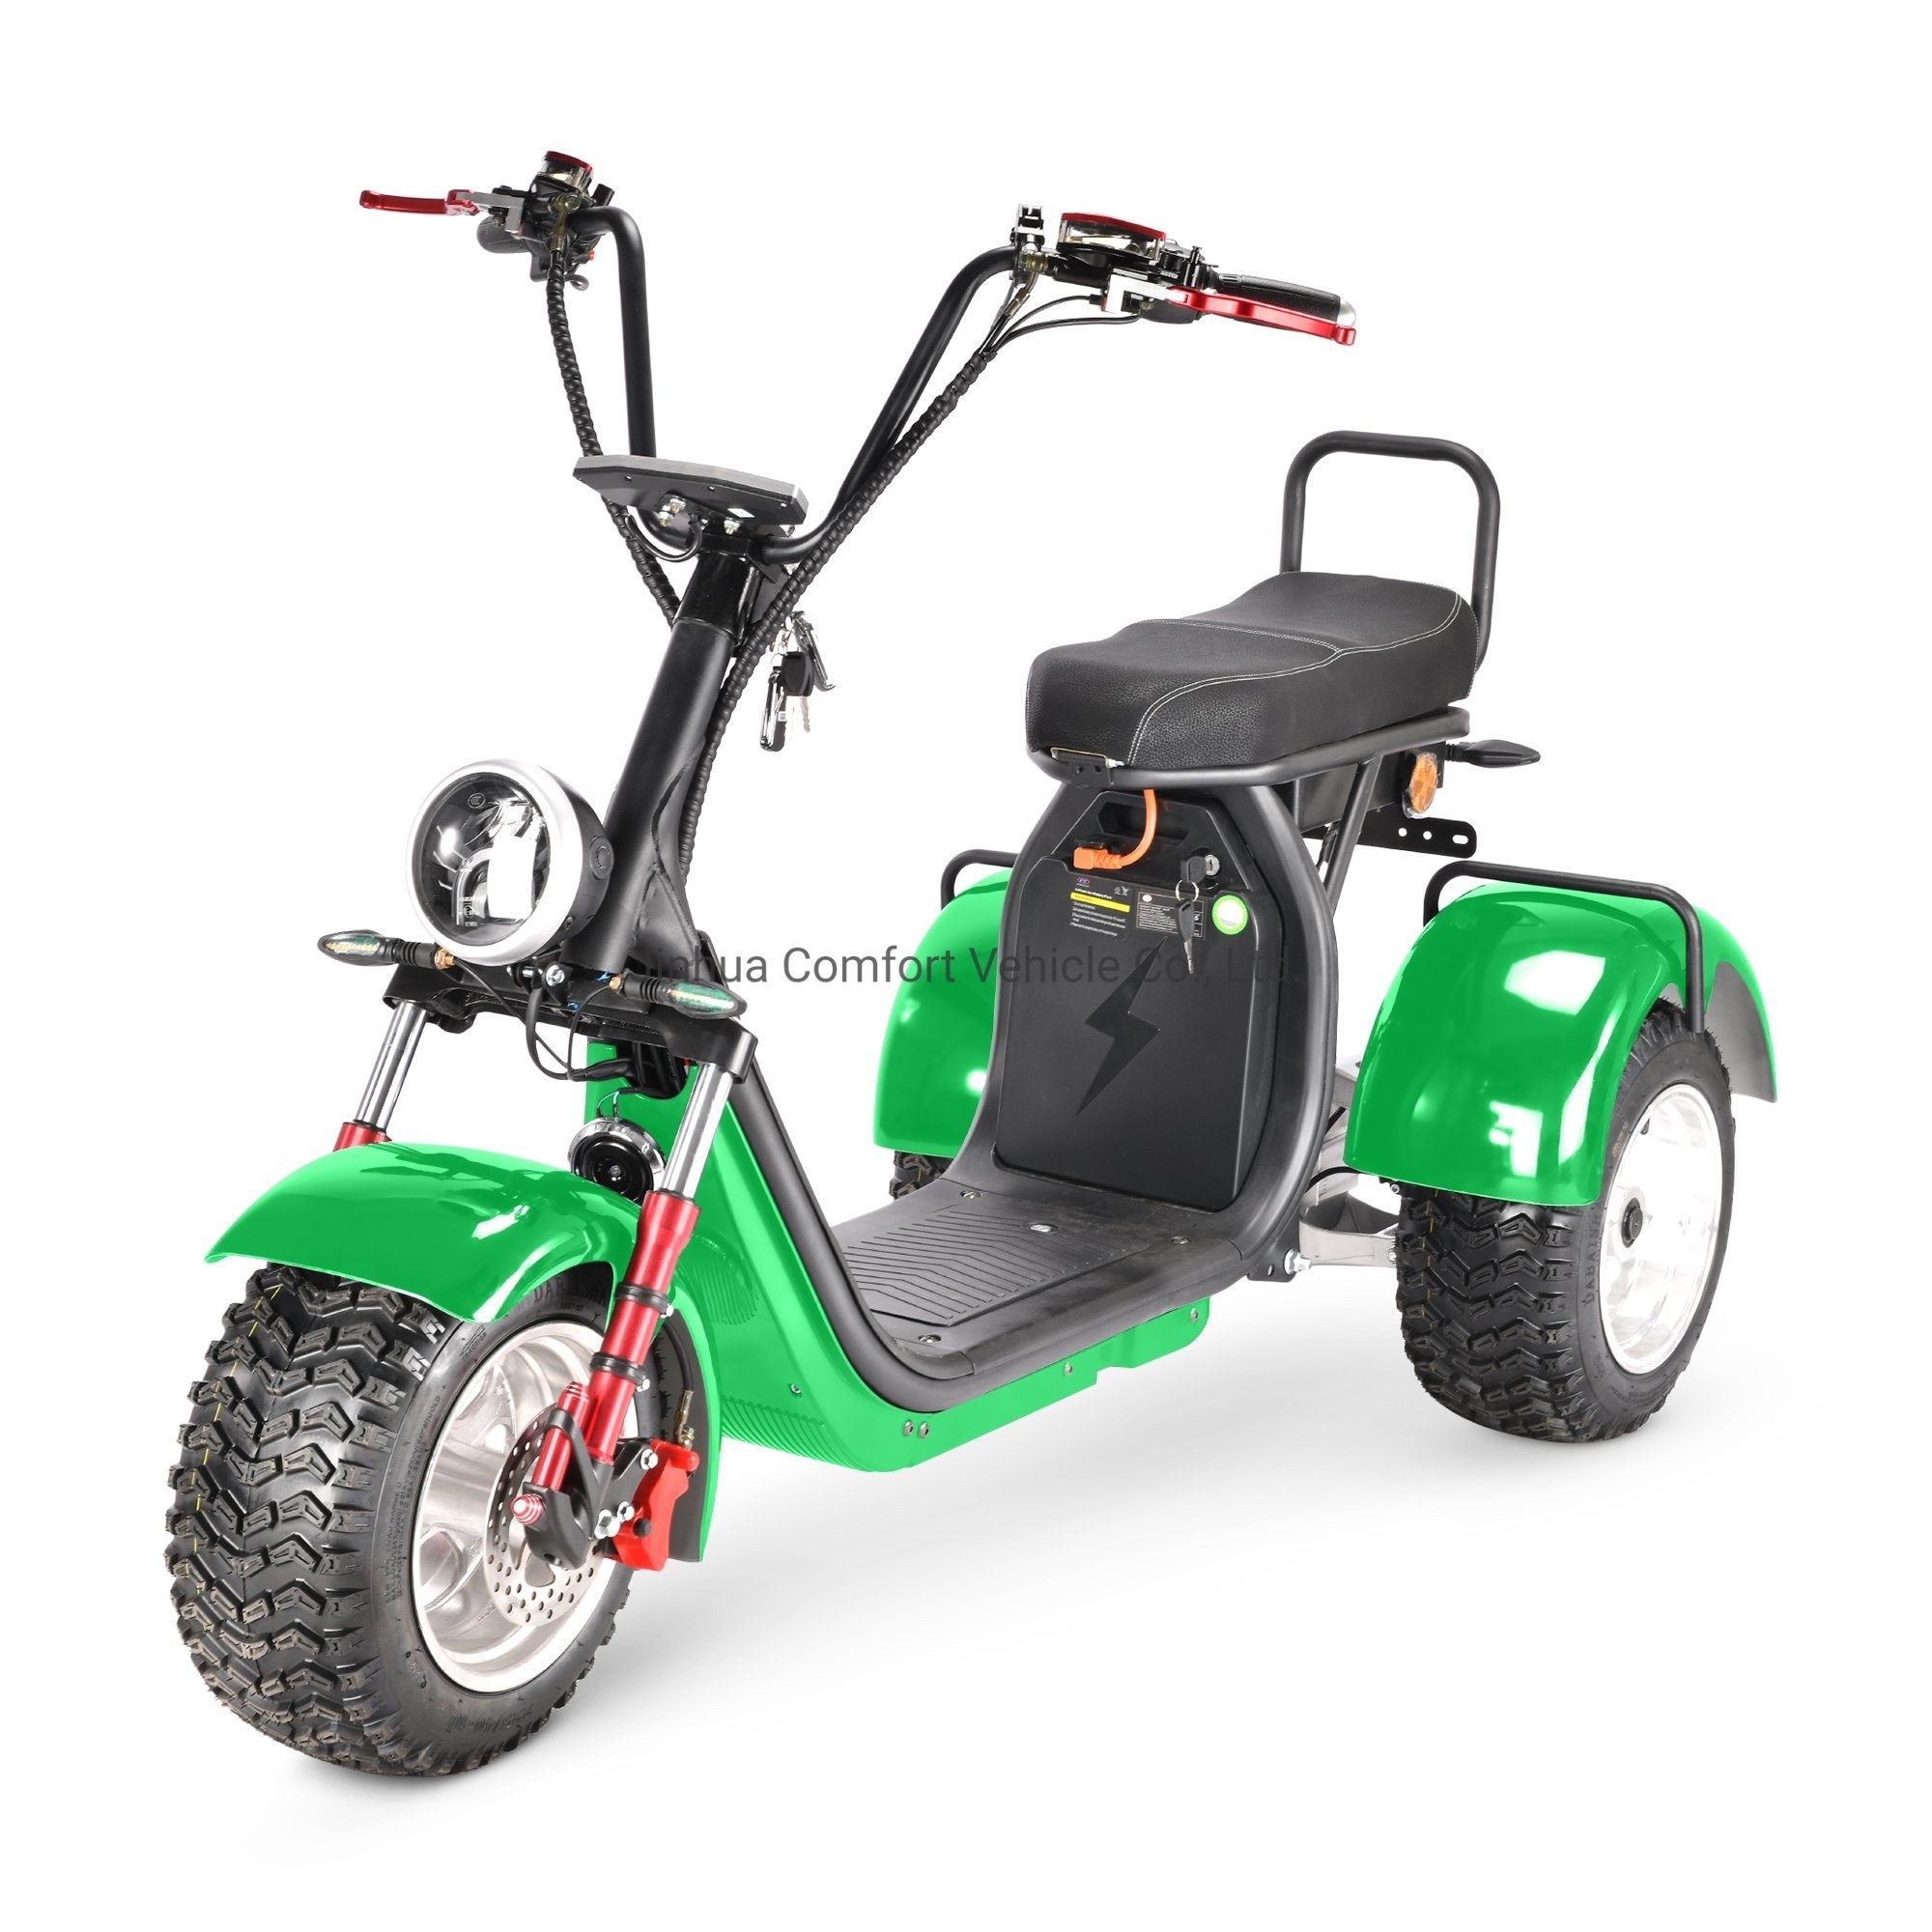 Factory 2022 EEC&Coc City Electric Scooter 1500W - 3000W, Electric City-Coco Halley Motorcycle China Manufacturer